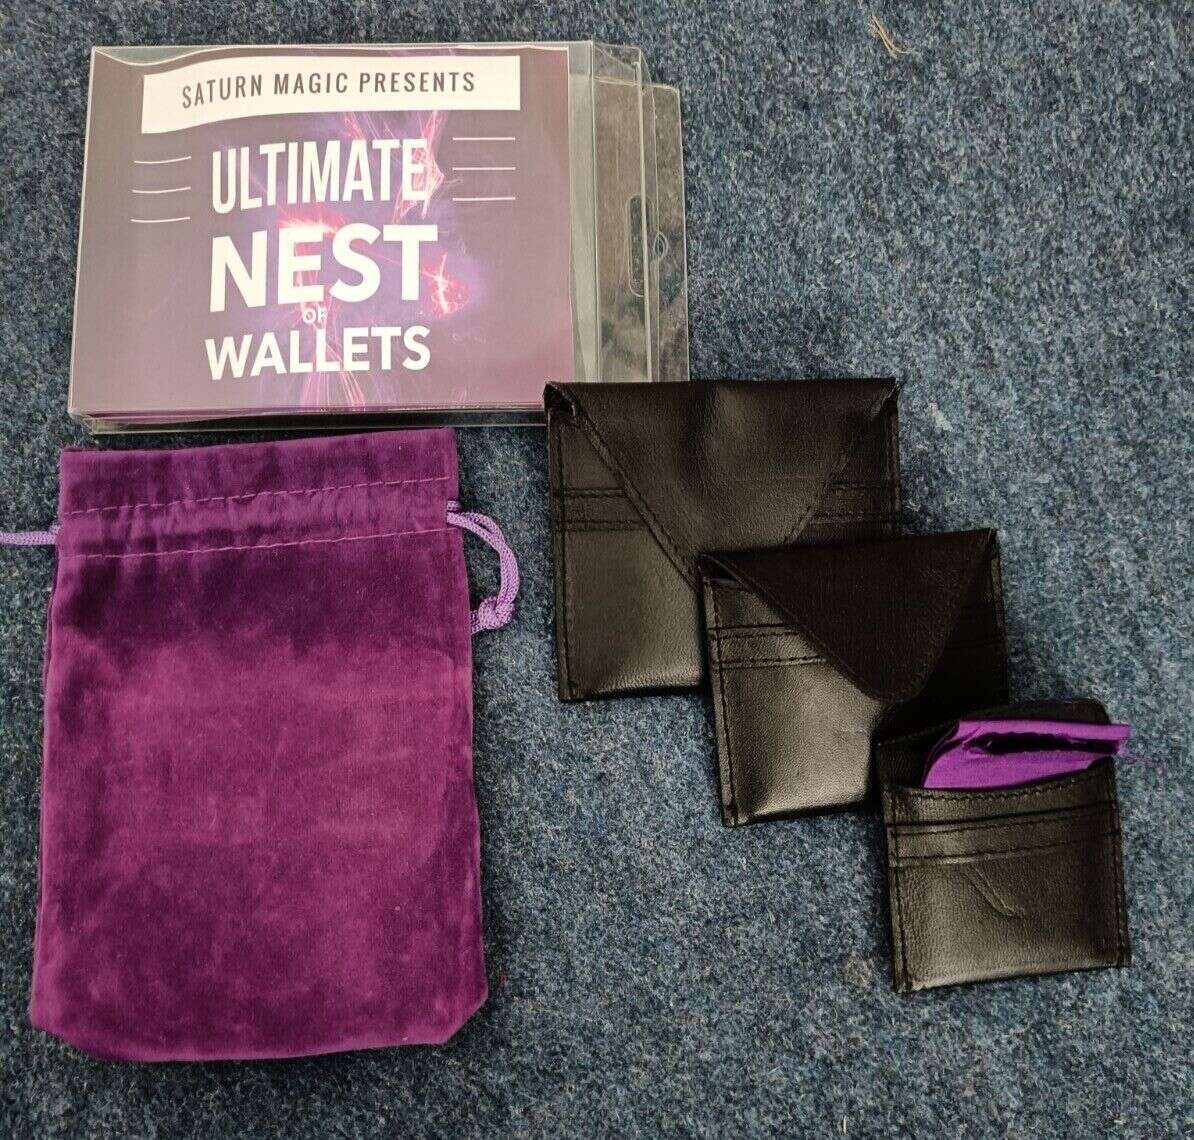 Ultimate Nest of Wallets by Mark Traversoni and Saturn Magic including packaging, cloth and cloth bag